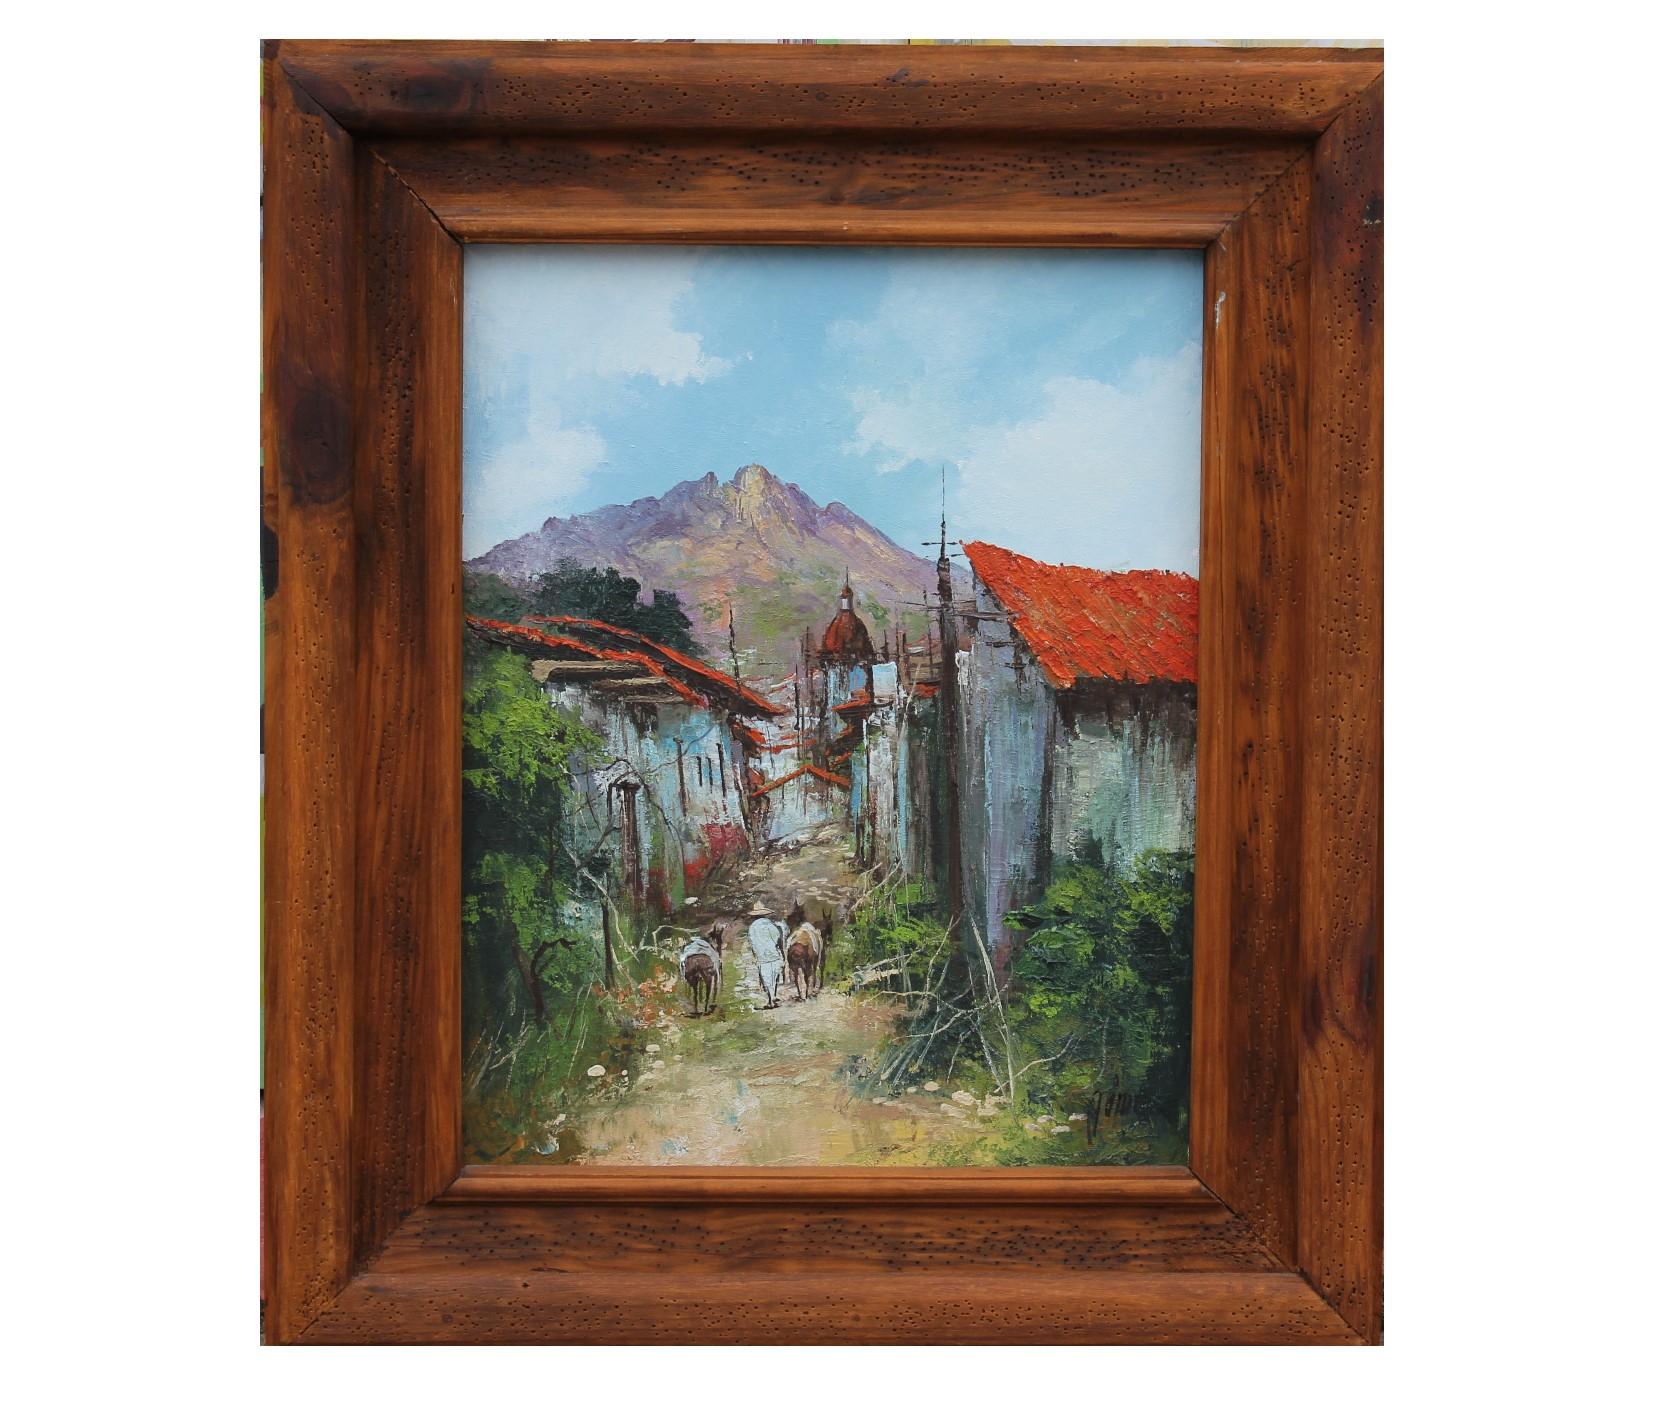 Unknown Figurative Painting - South American Landscape View of a Town